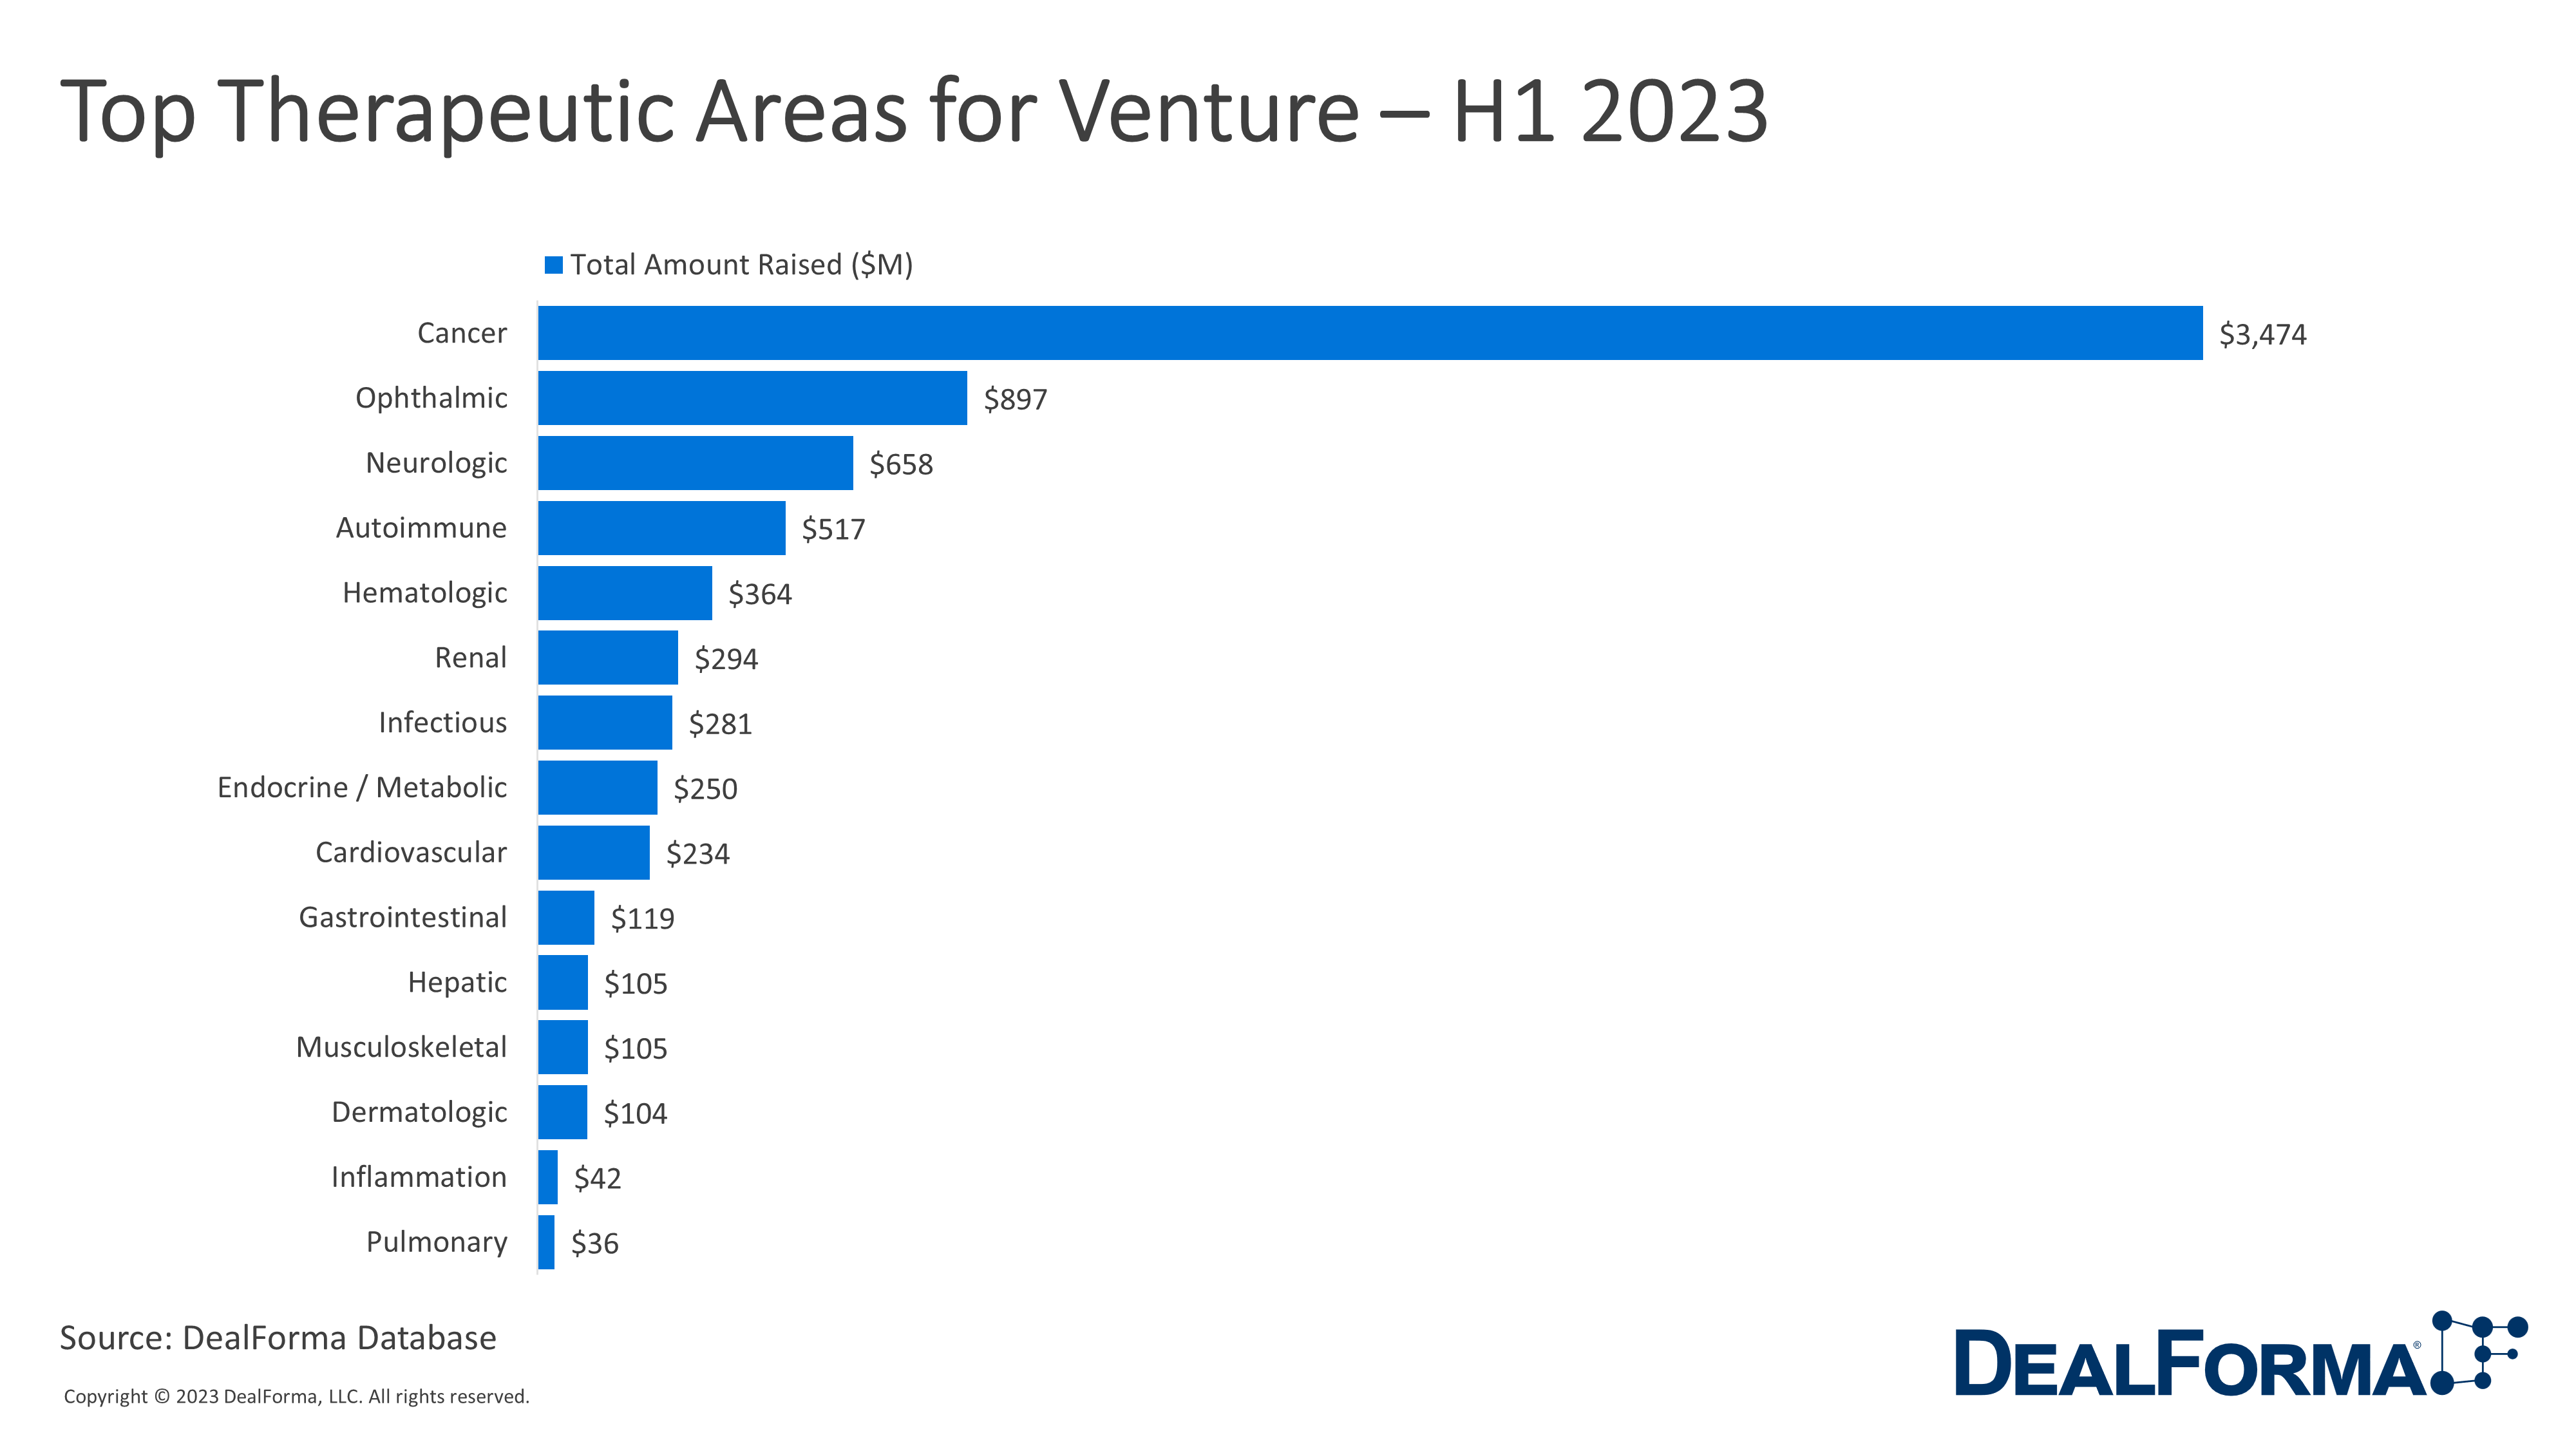 Top Therapeutic Areas for Venture H1 2023 - DealForma